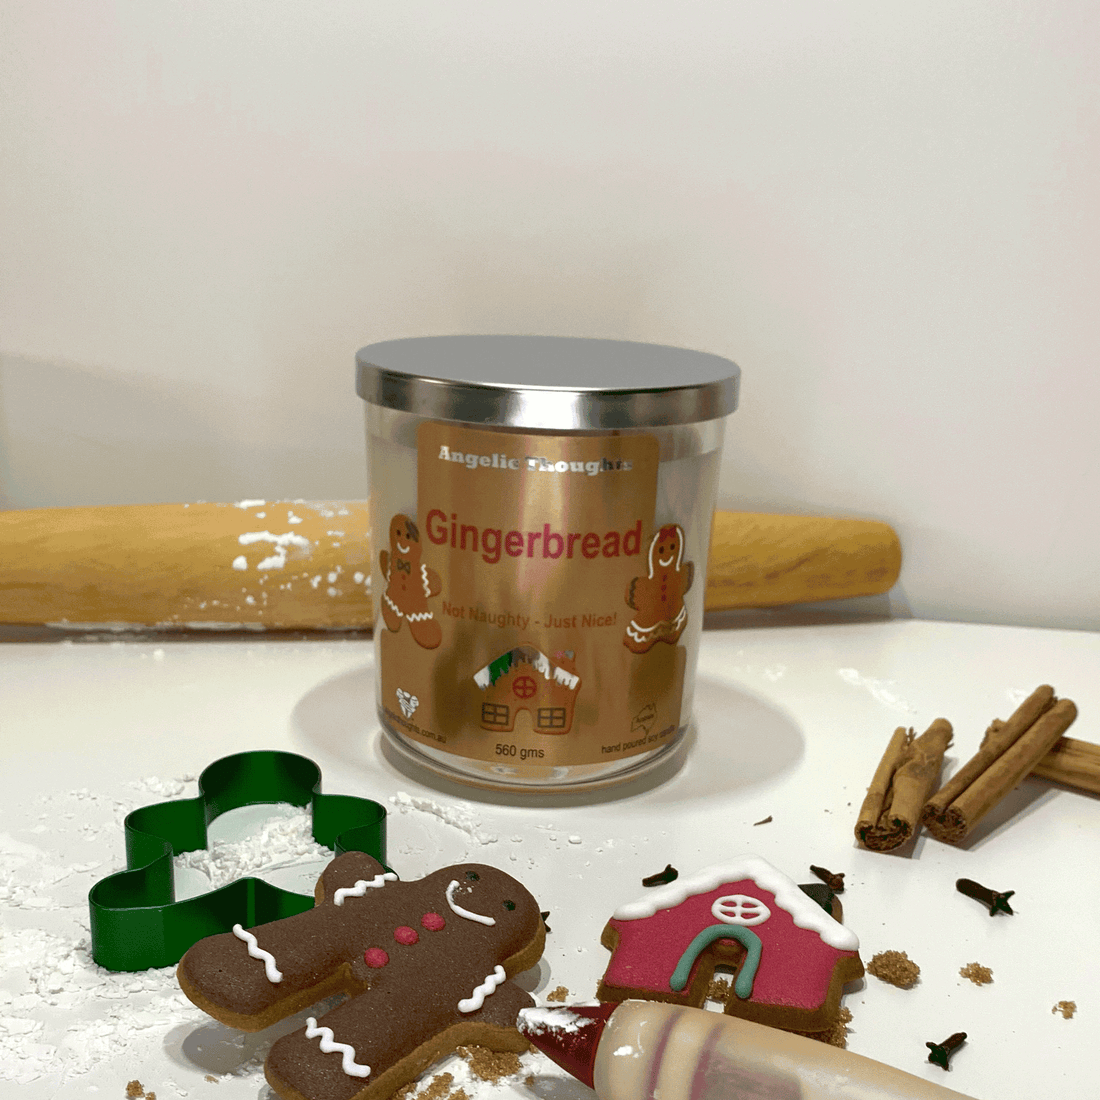 Gingerbread Soy Wax Candle - Extra Extra Large - 560gms